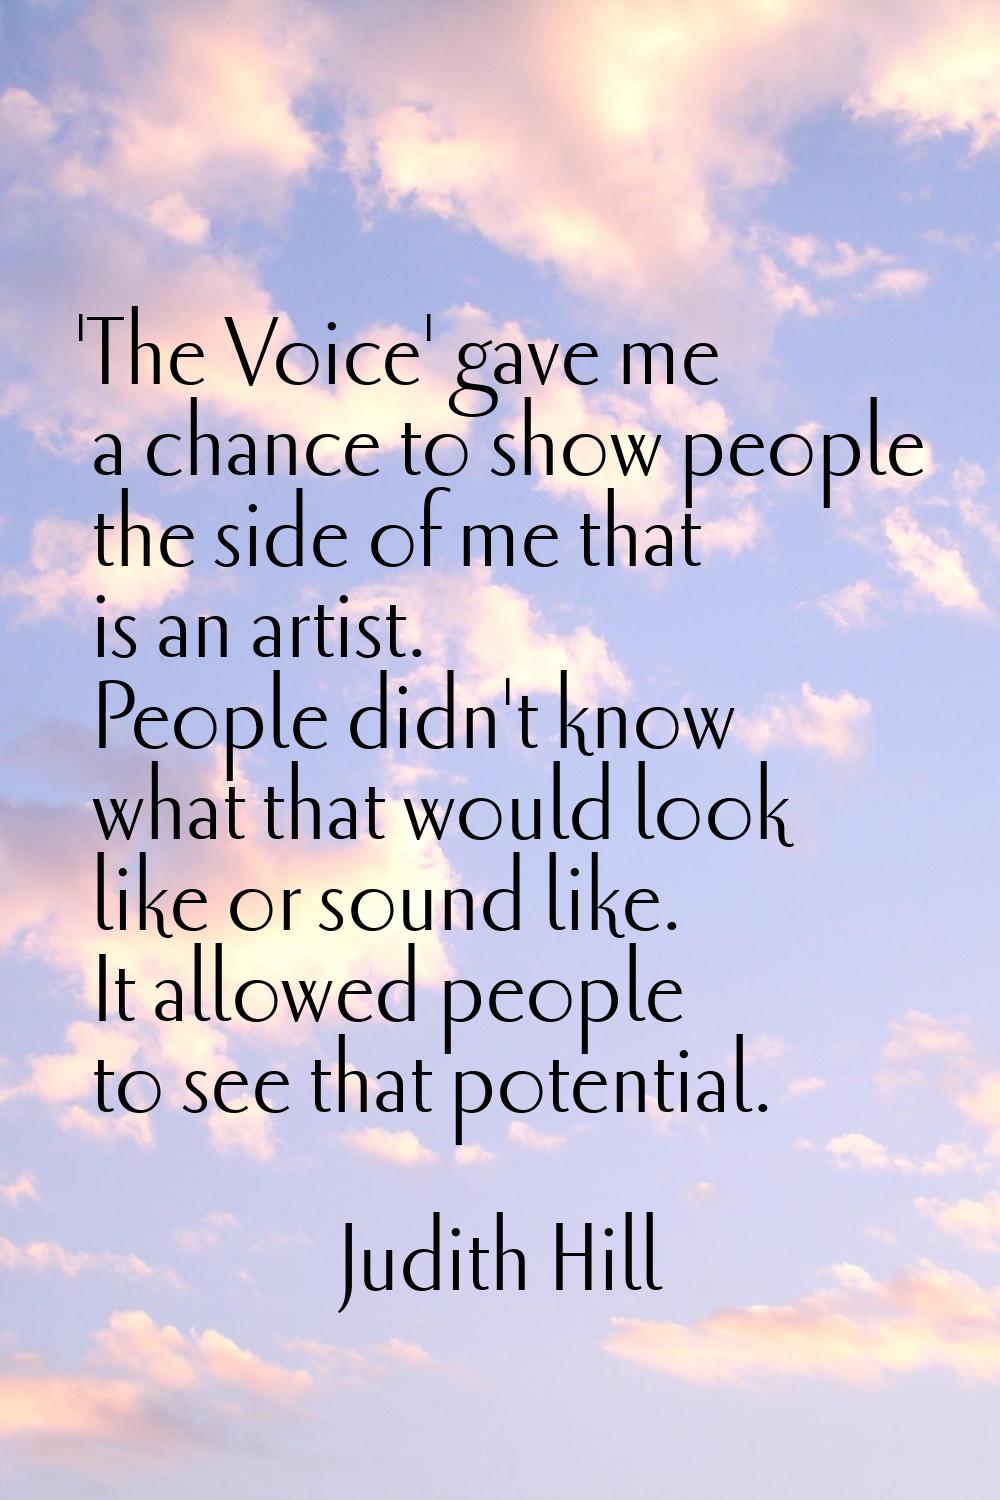 'The Voice' gave me a chance to show people the side of me that is an artist. People didn't know wh